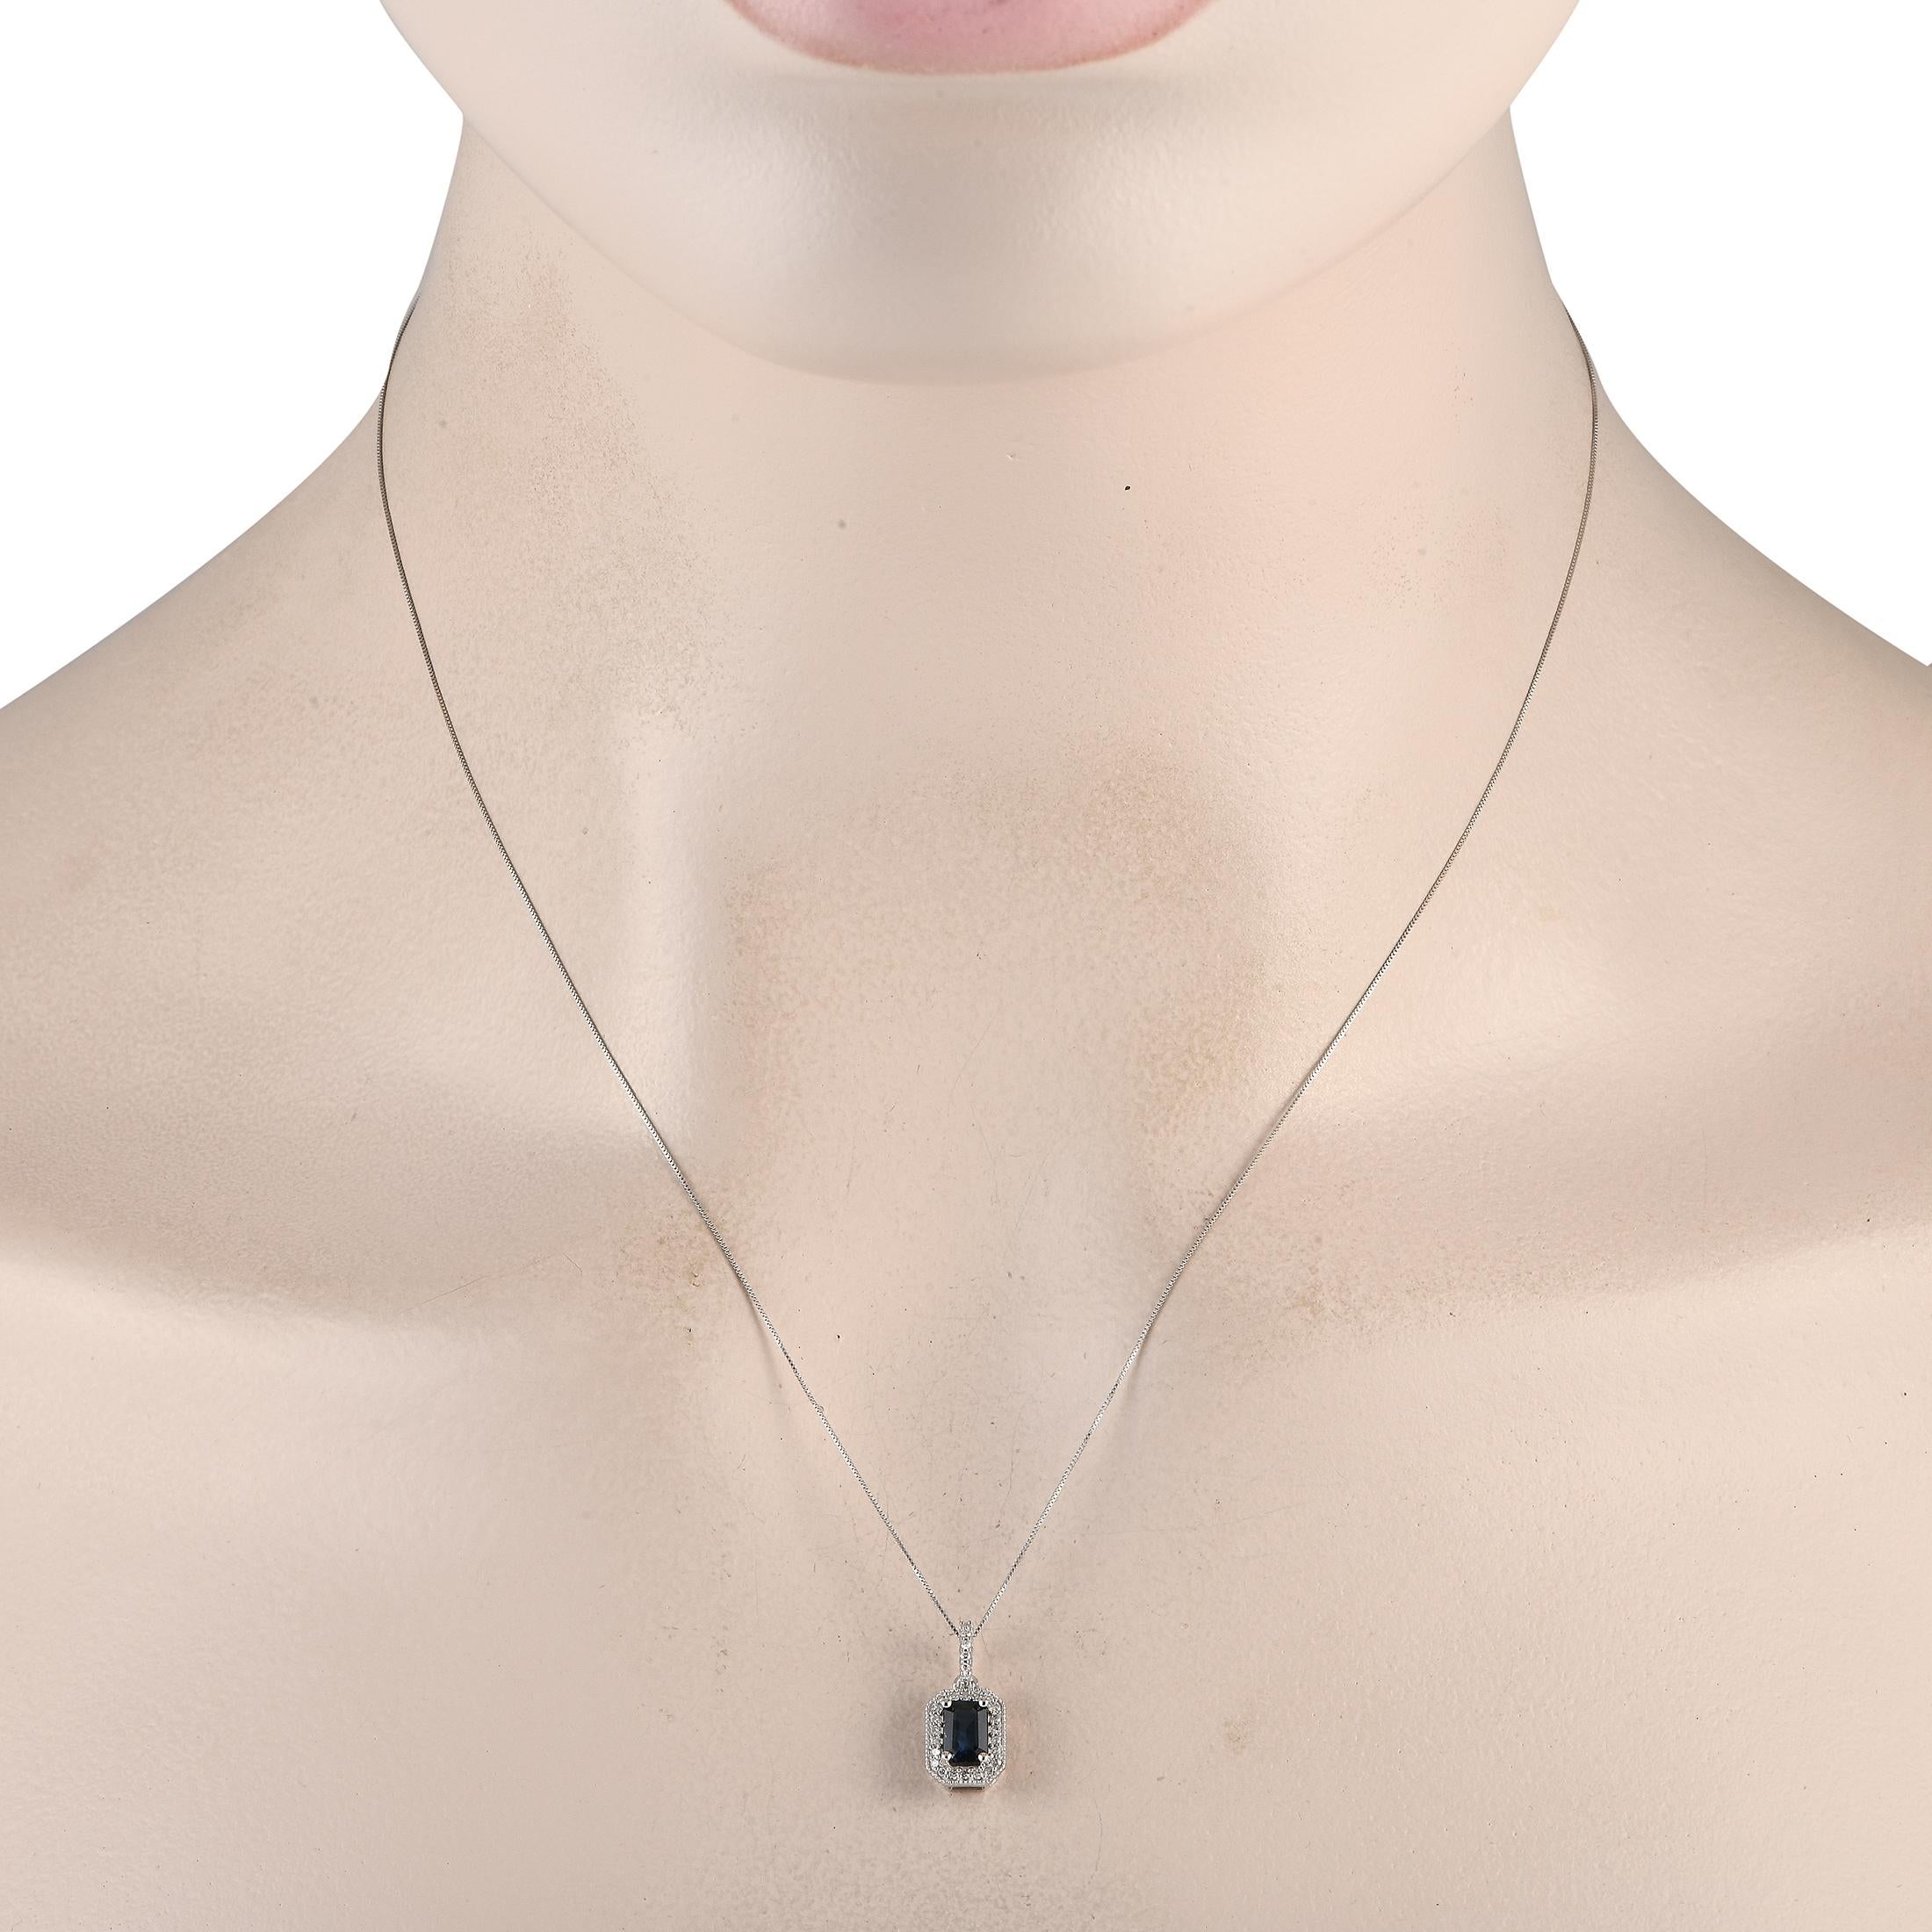 This elegant, understated necklace is simply exquisite in design. Suspended from an 18 chain, youll find an opulent 14K white gold pendant that is adorned with a breathtaking blue sapphire center stone and diamonds totaling 0.10 carats. The pendant